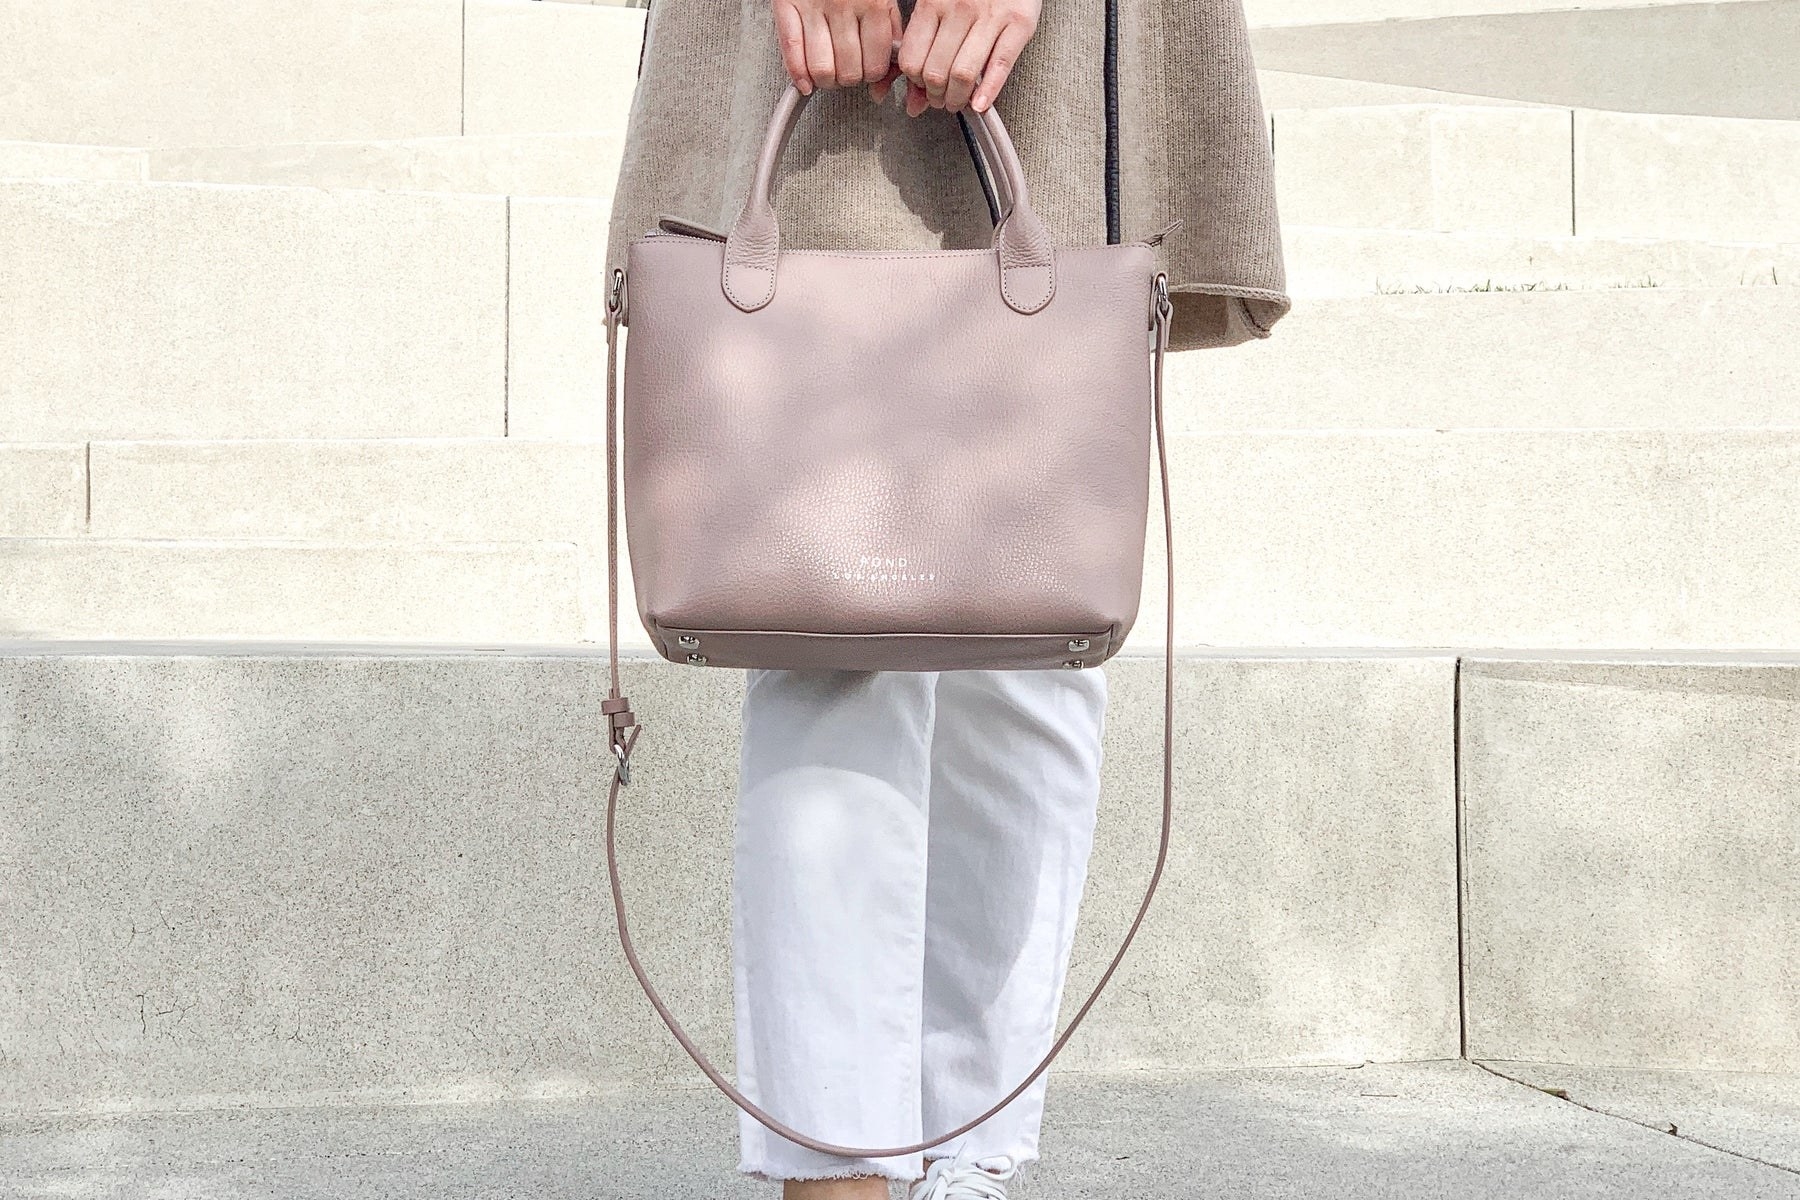 a model holding a blush colored tote bag